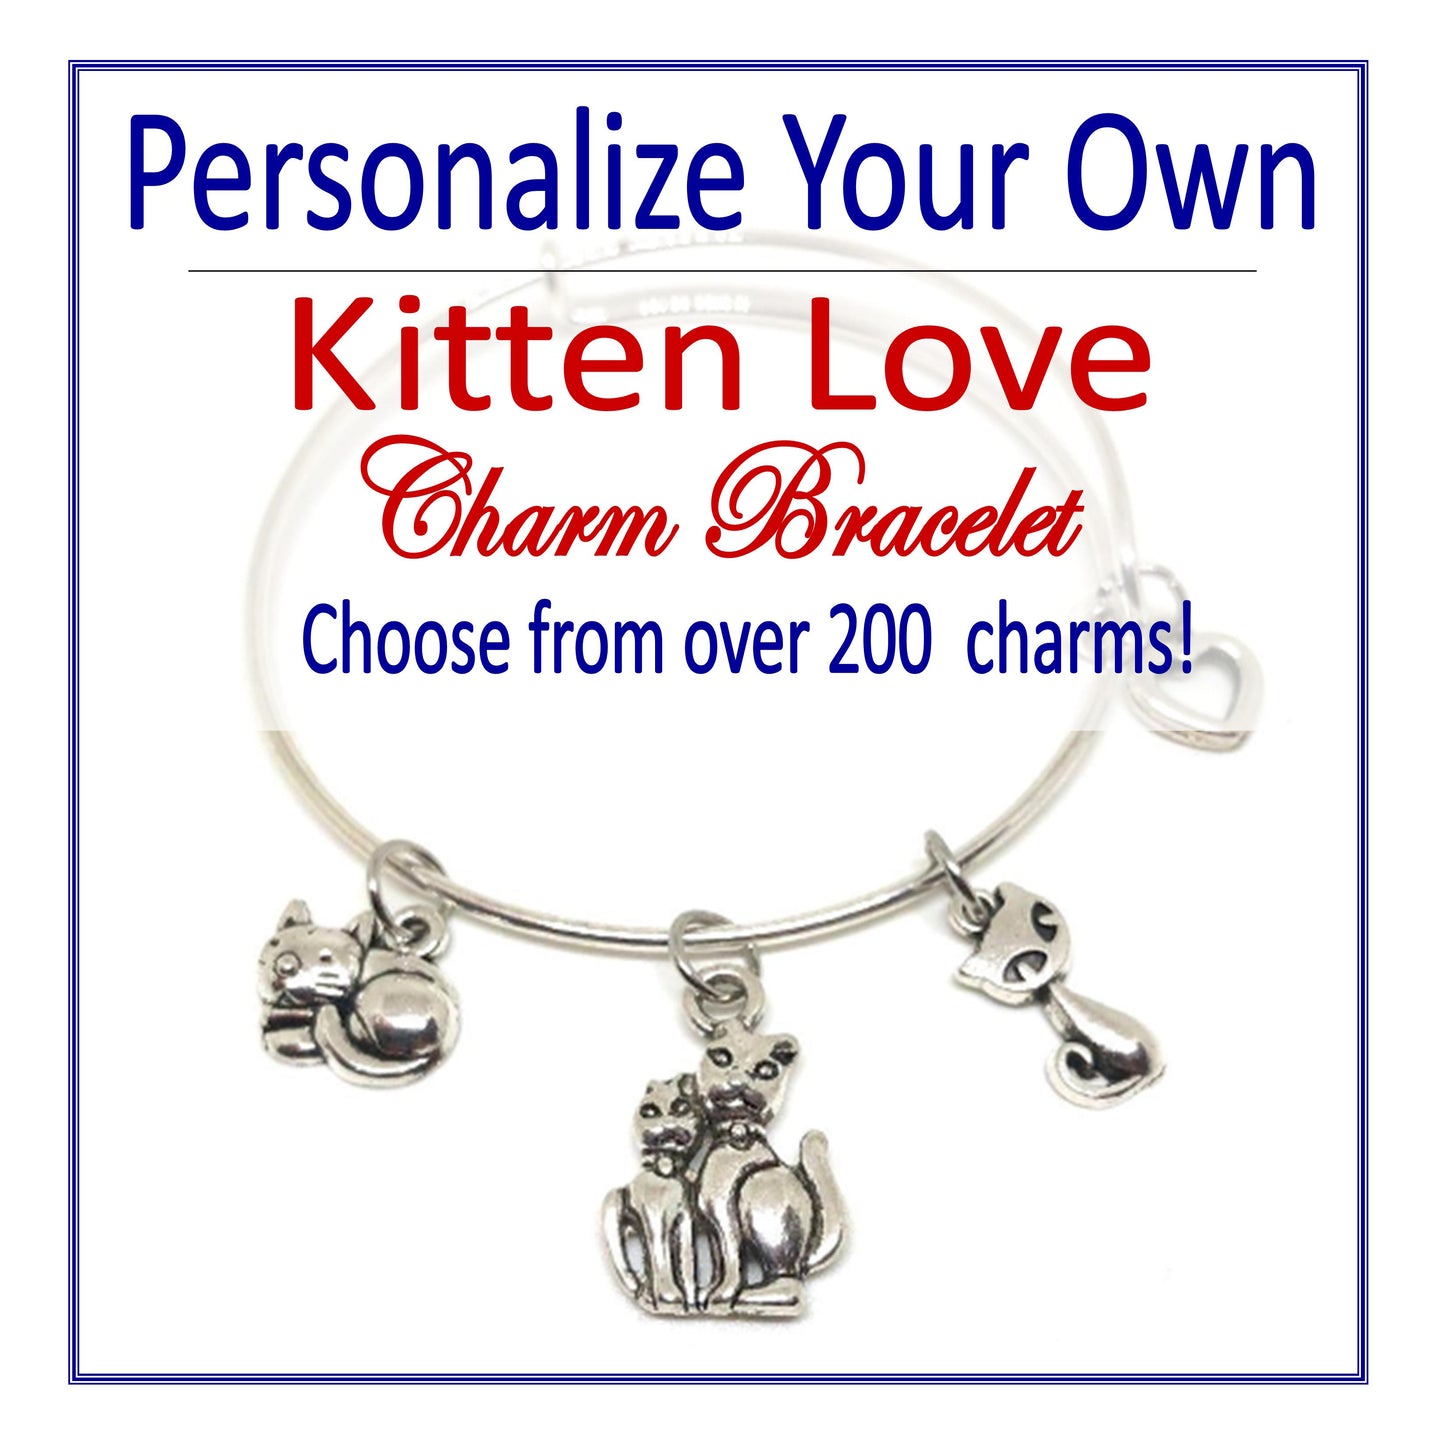 CUSTOM CHARM BRACELET, Design Your Own, Choose Your Charms, Birthday  Bracelet, Stackable Bangles, Personalized Gifts, Gifts for Her - Etsy